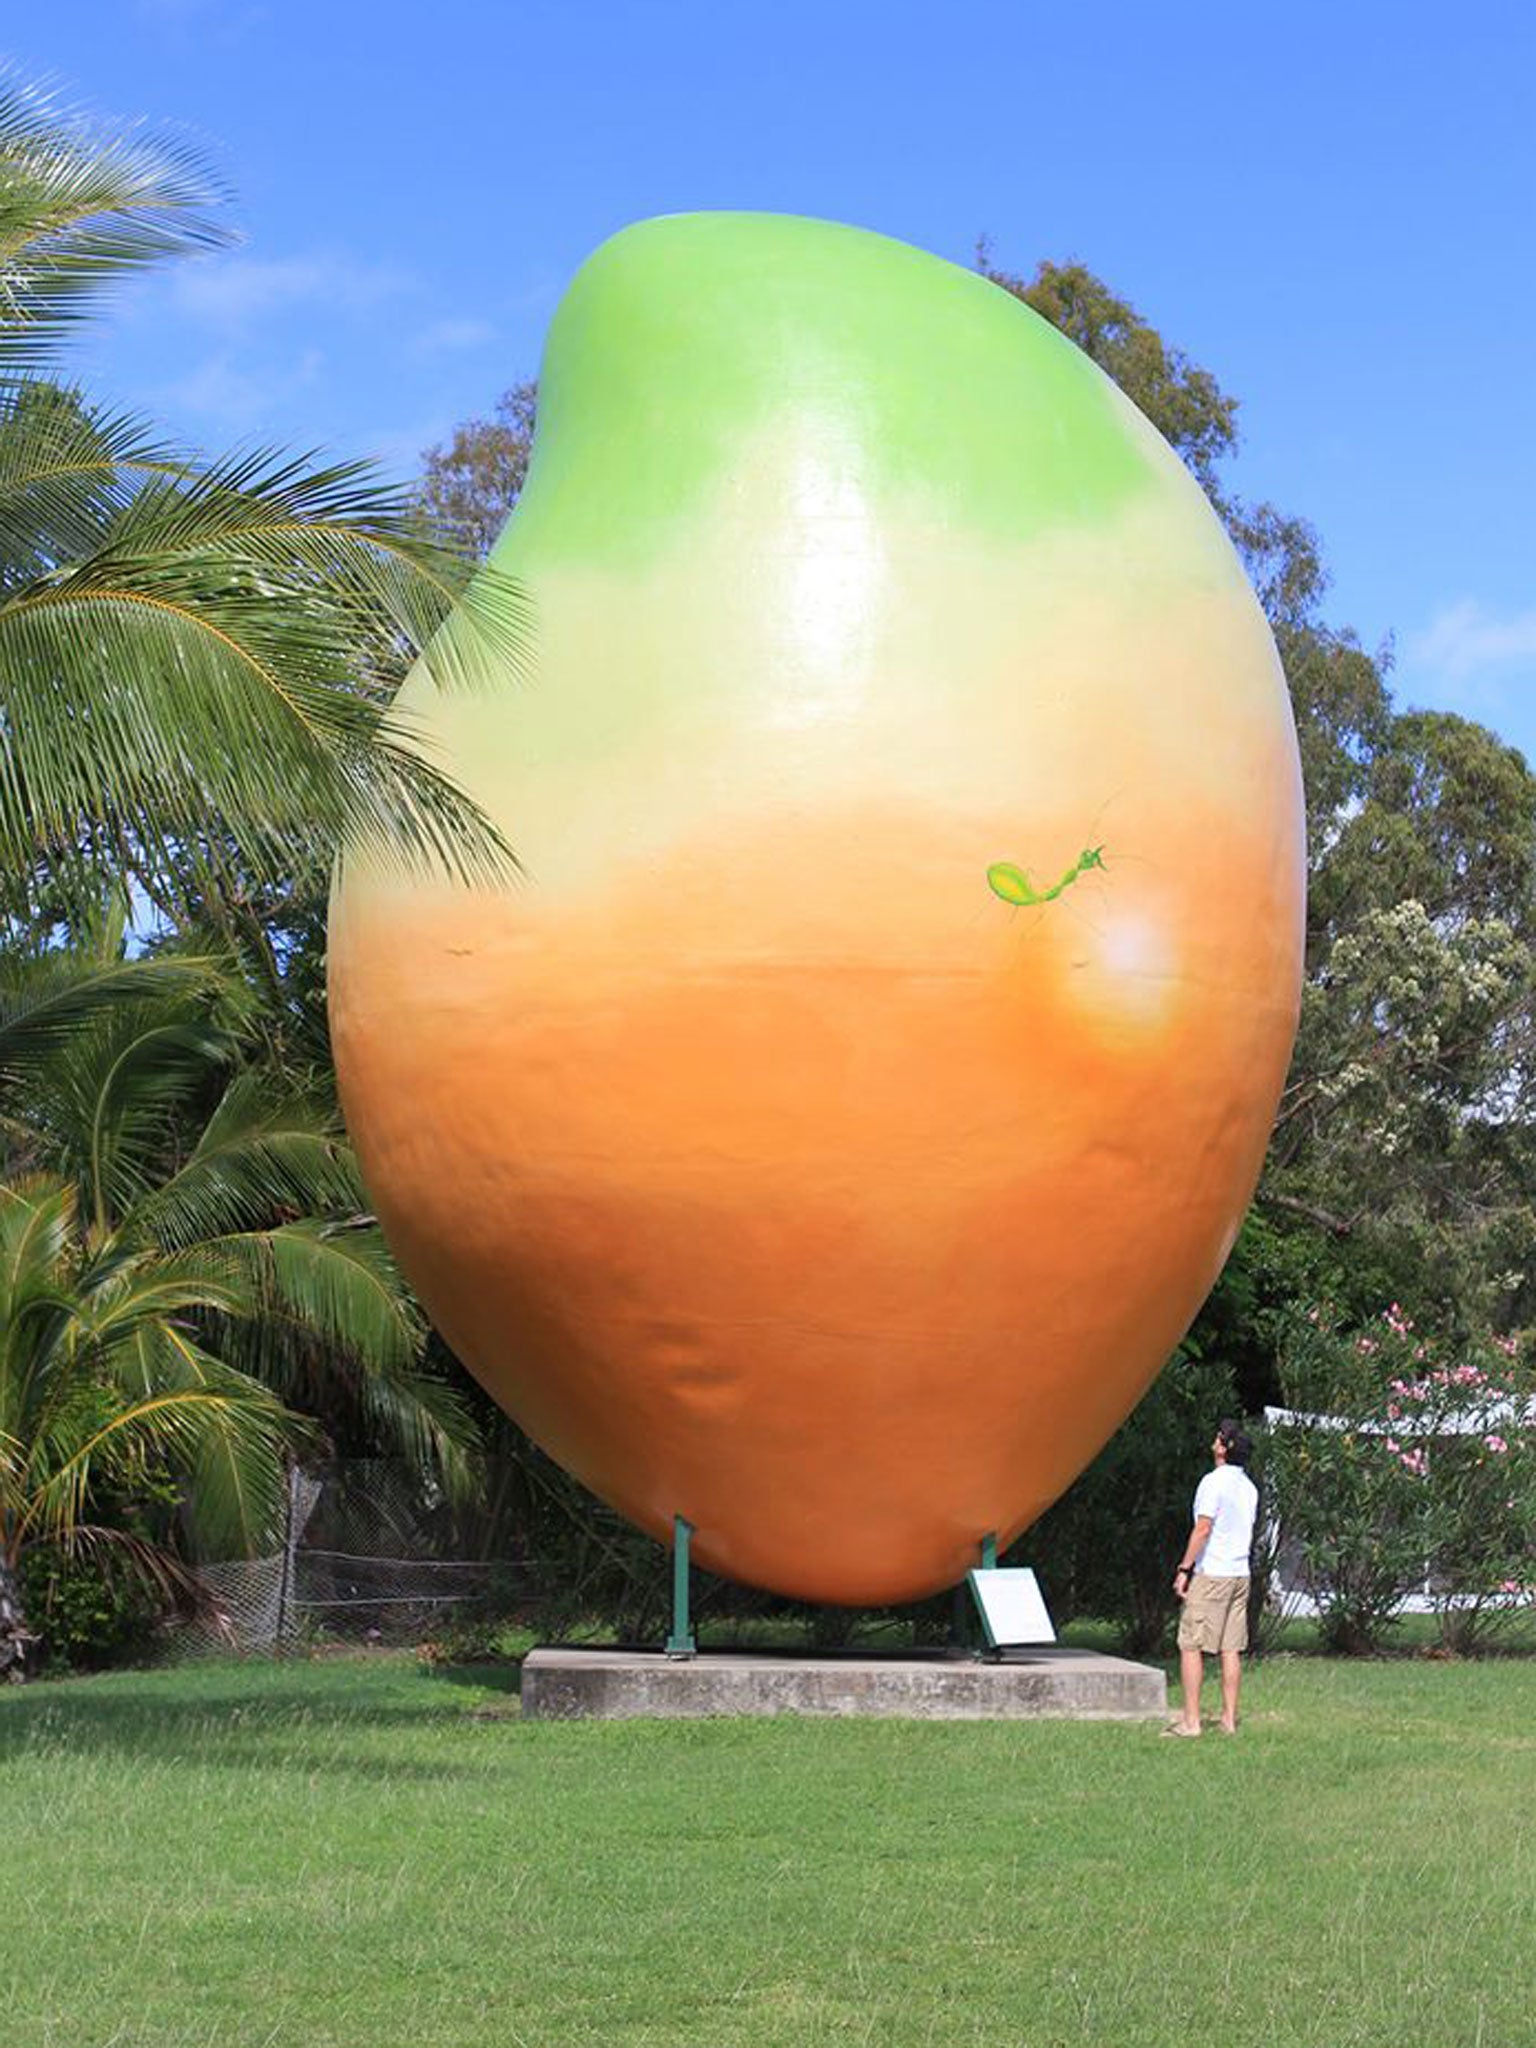 Bowen's Big Mango was erected in 2002 and stands at 10 metres tall